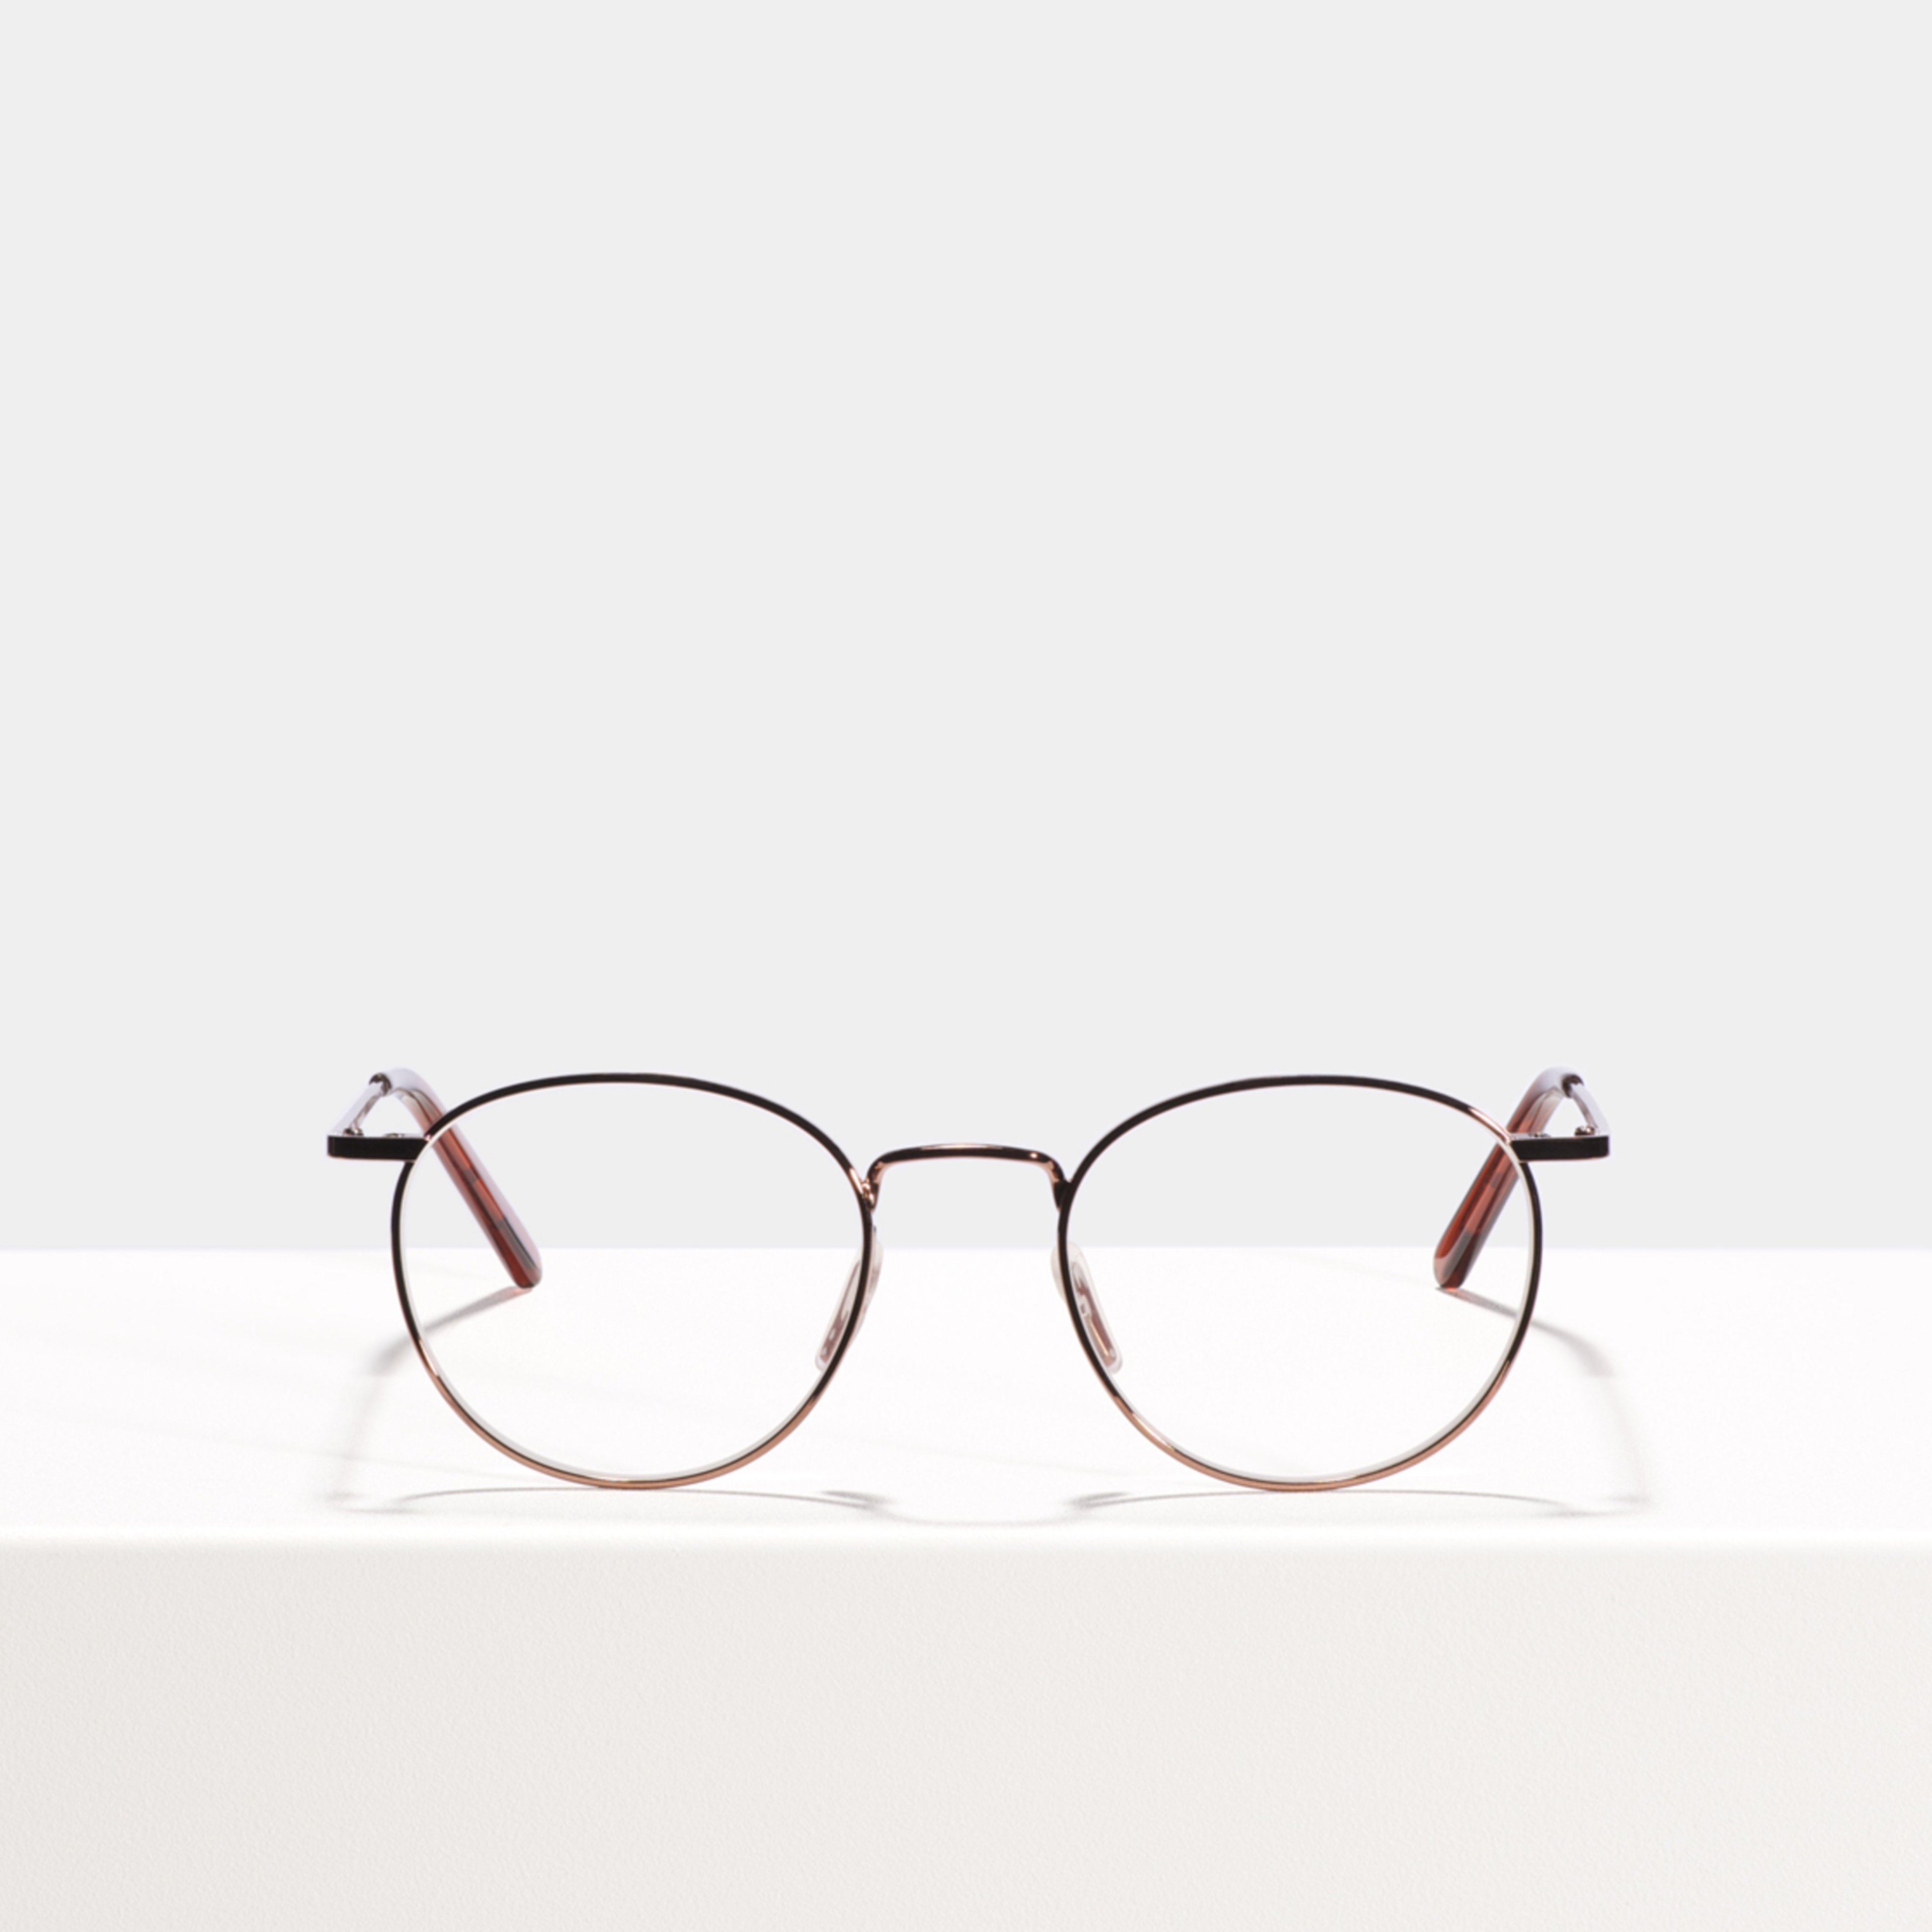 Ace & Tate Glasses | rond metaal in Bruin, Rood